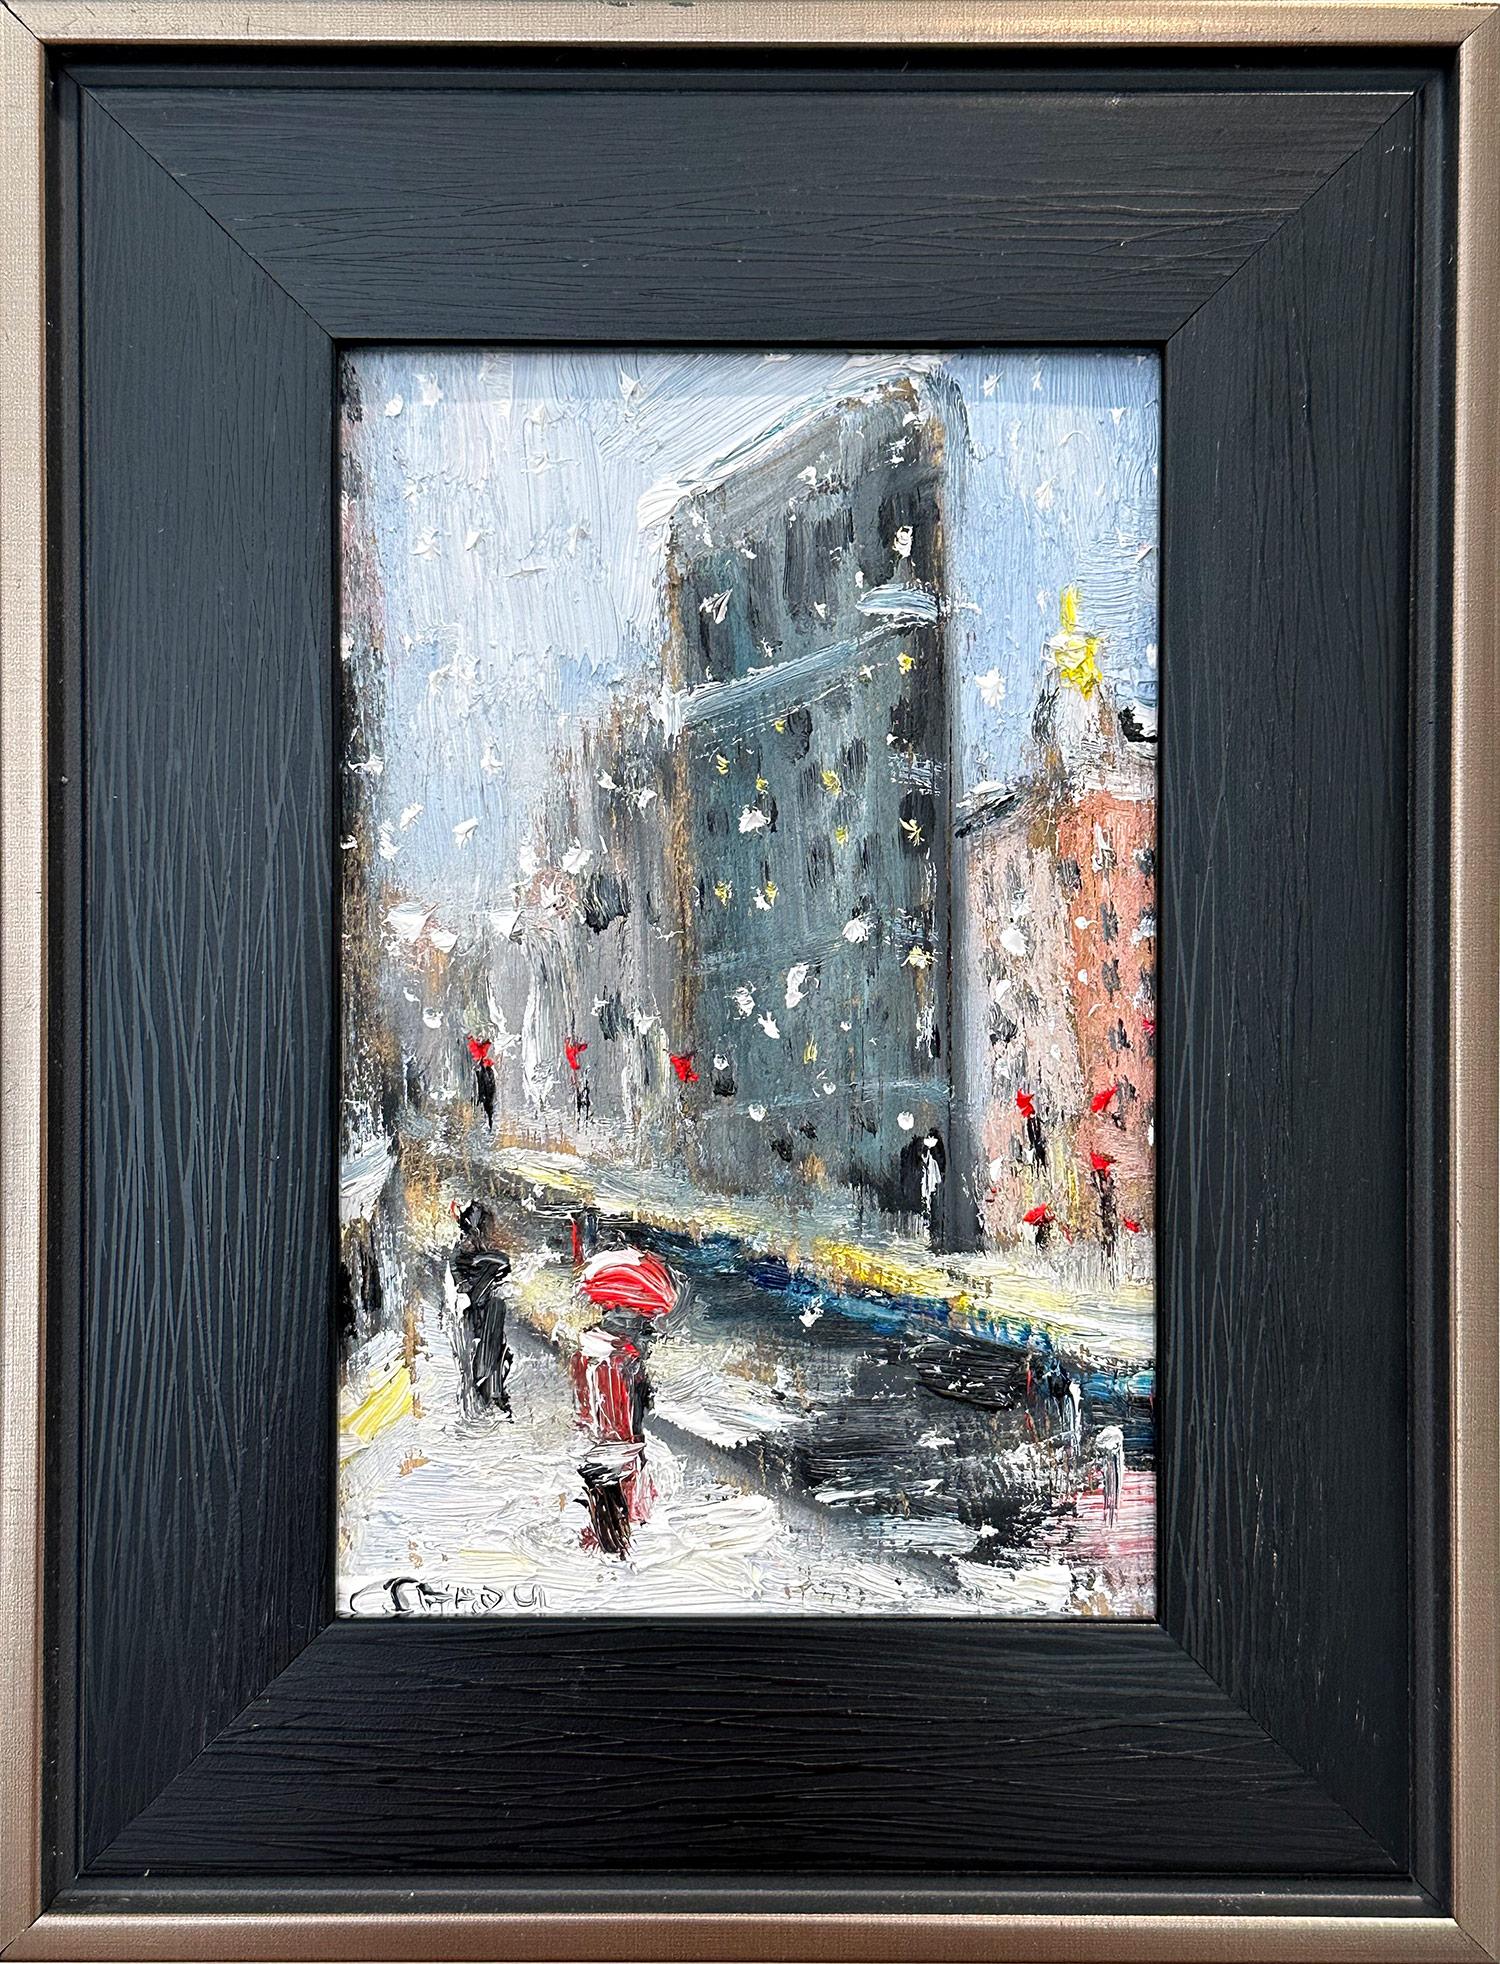 Cindy Shaoul Figurative Painting - "Snow By Flatiron" Impressionistic Oil Painting New York City Landscape on Wood 